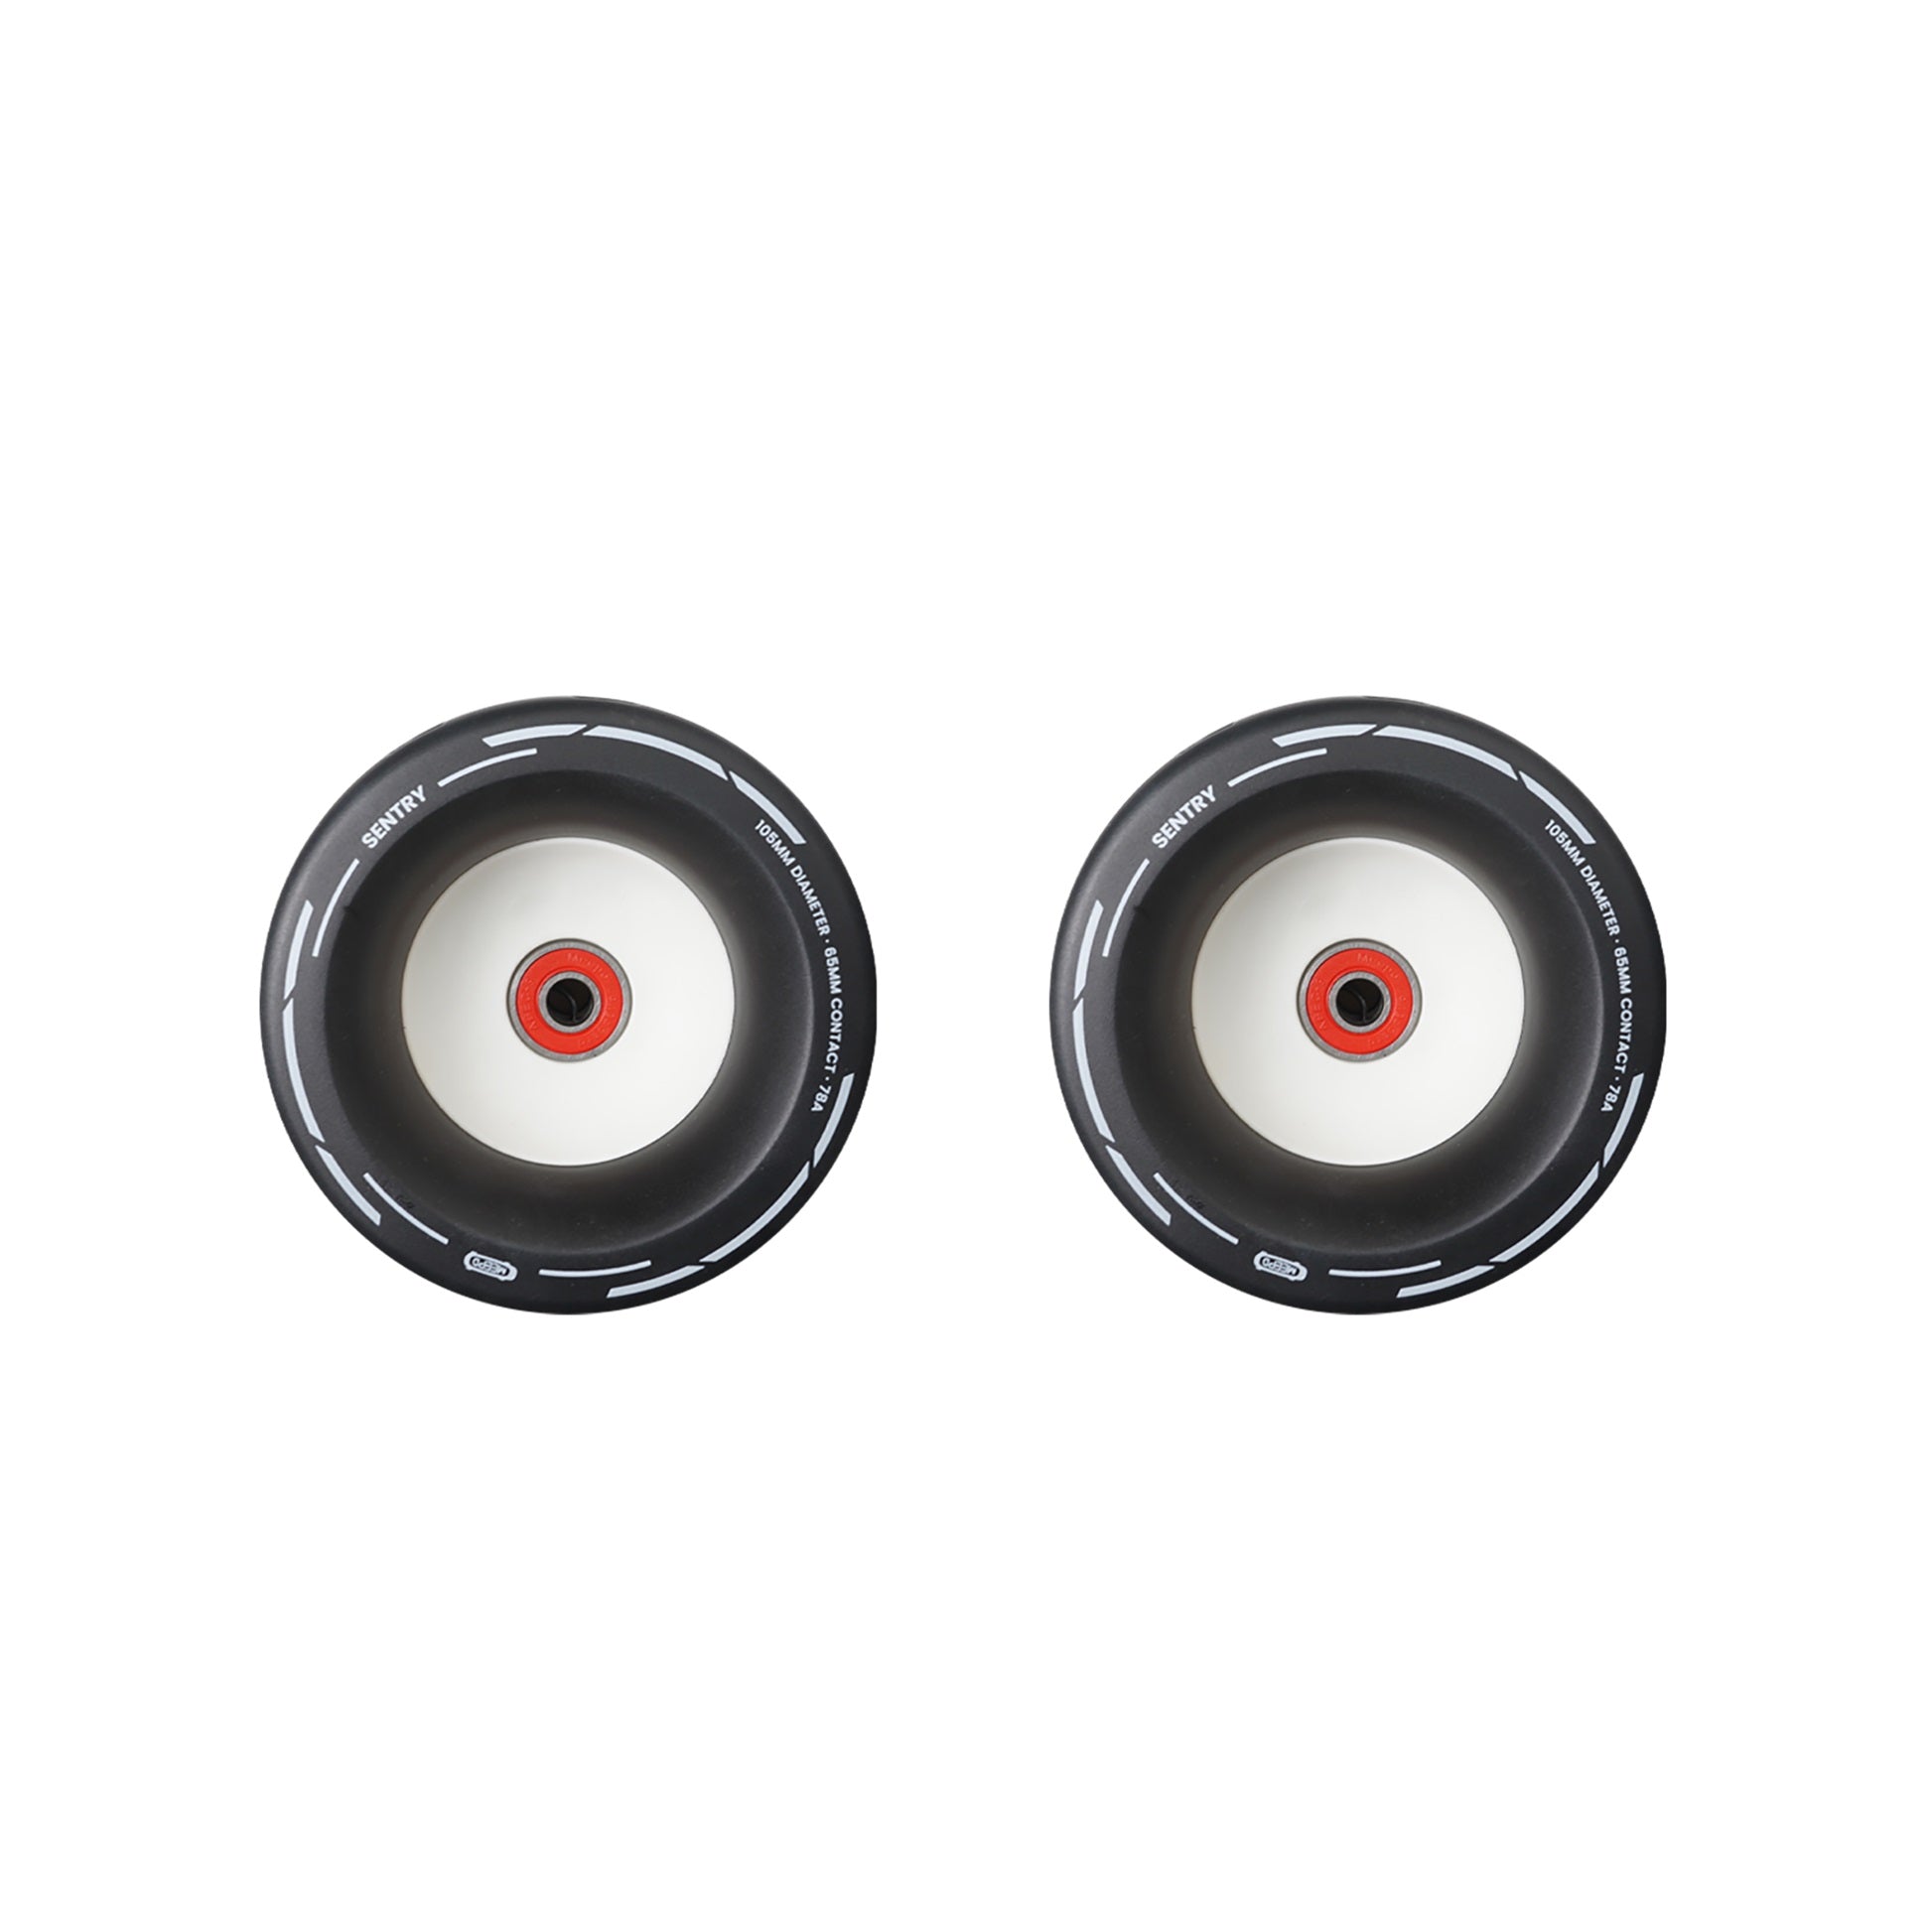 105mm Donut Front Wheels